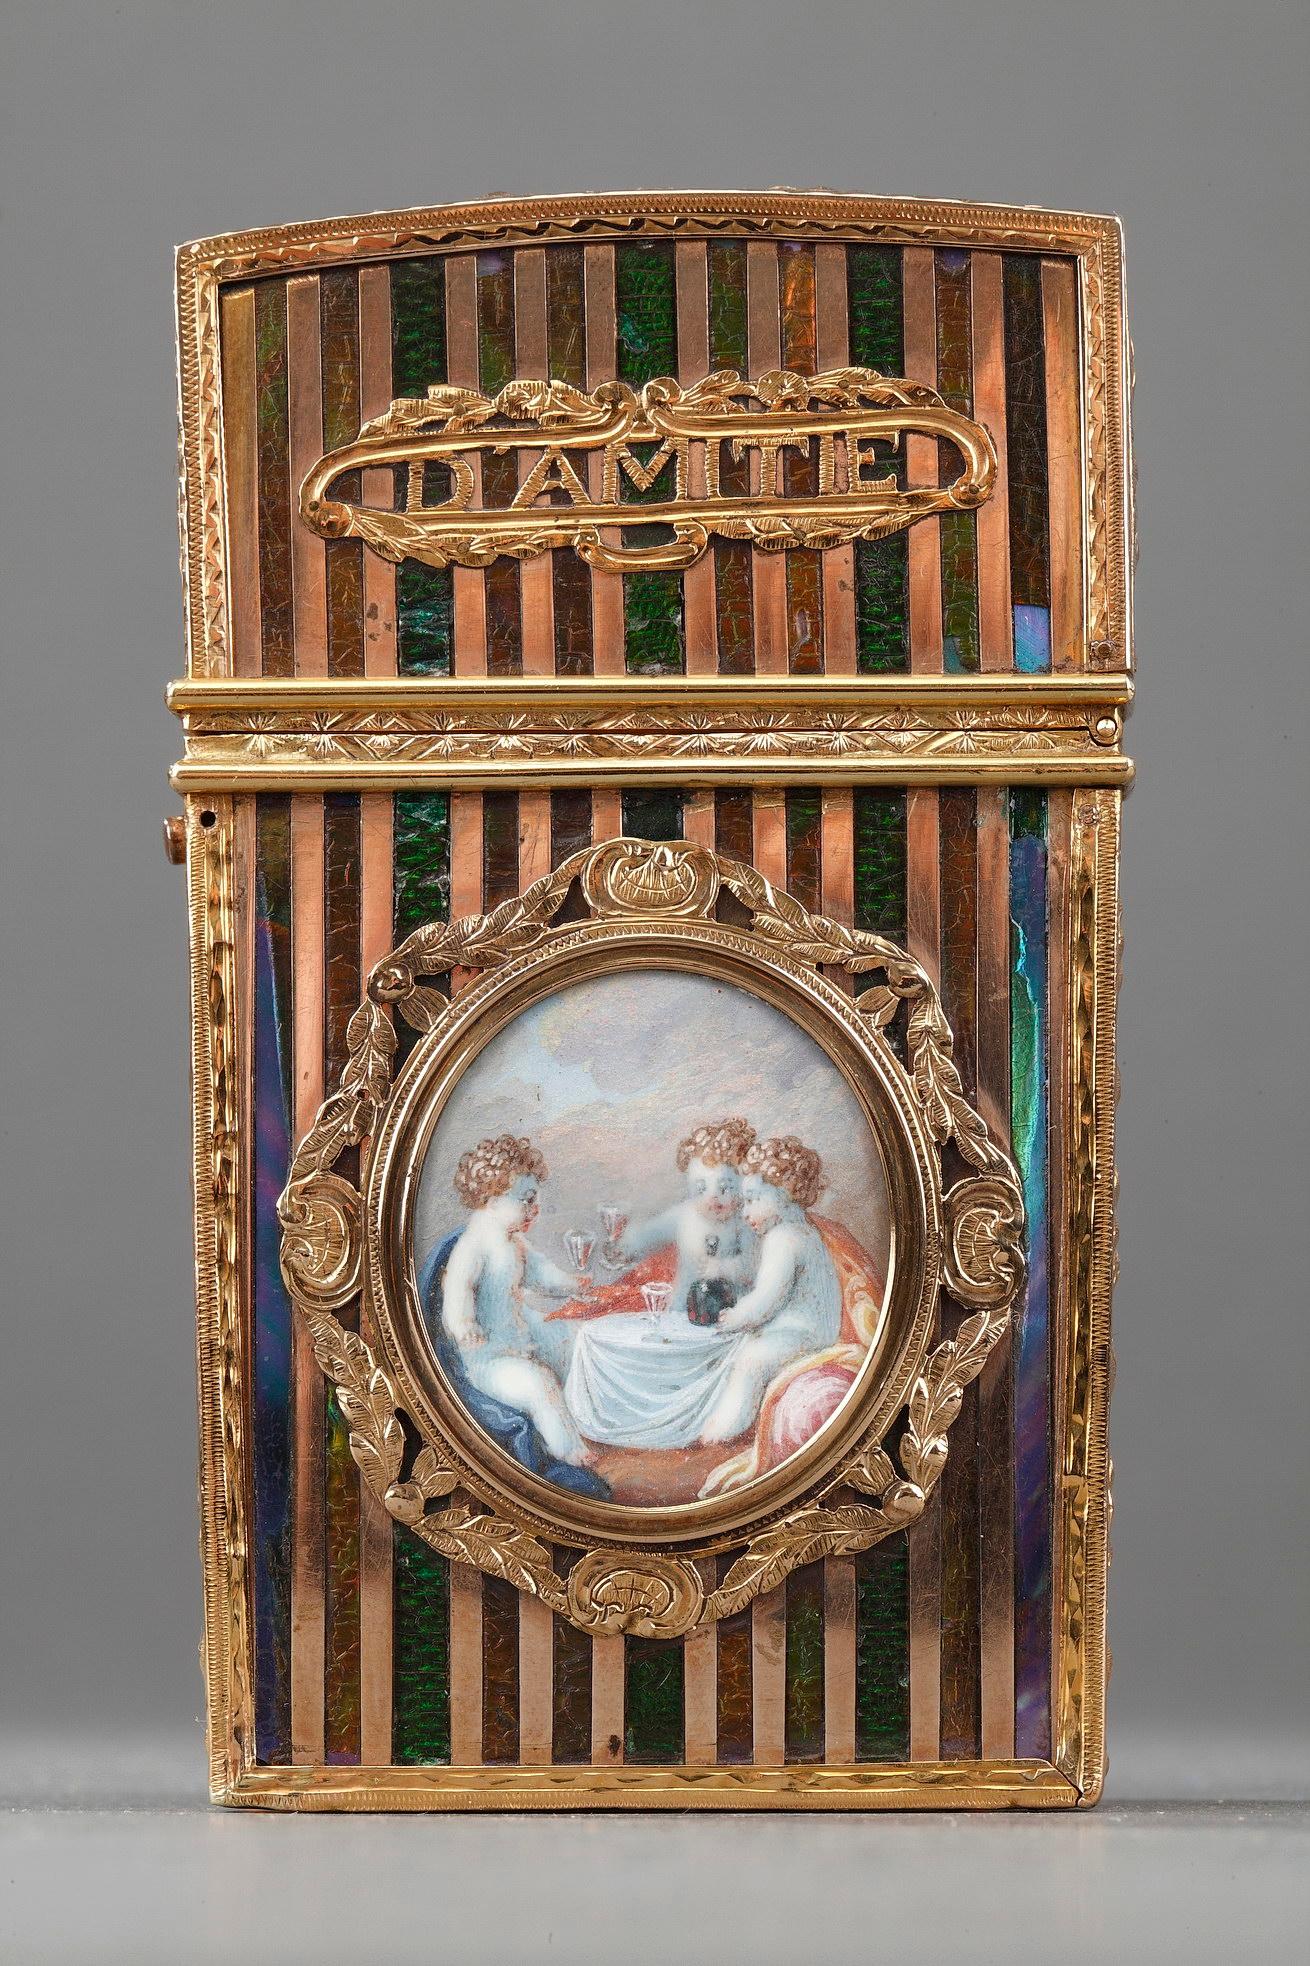 Flat, rectangular case for holding writing utensils in colored gold and vernis Martin (a type of imitation lacquer). A button serves to open the hinged lid. Four panels made of vernis Martin, which imitates the iridescence of mother-of-pearl, form